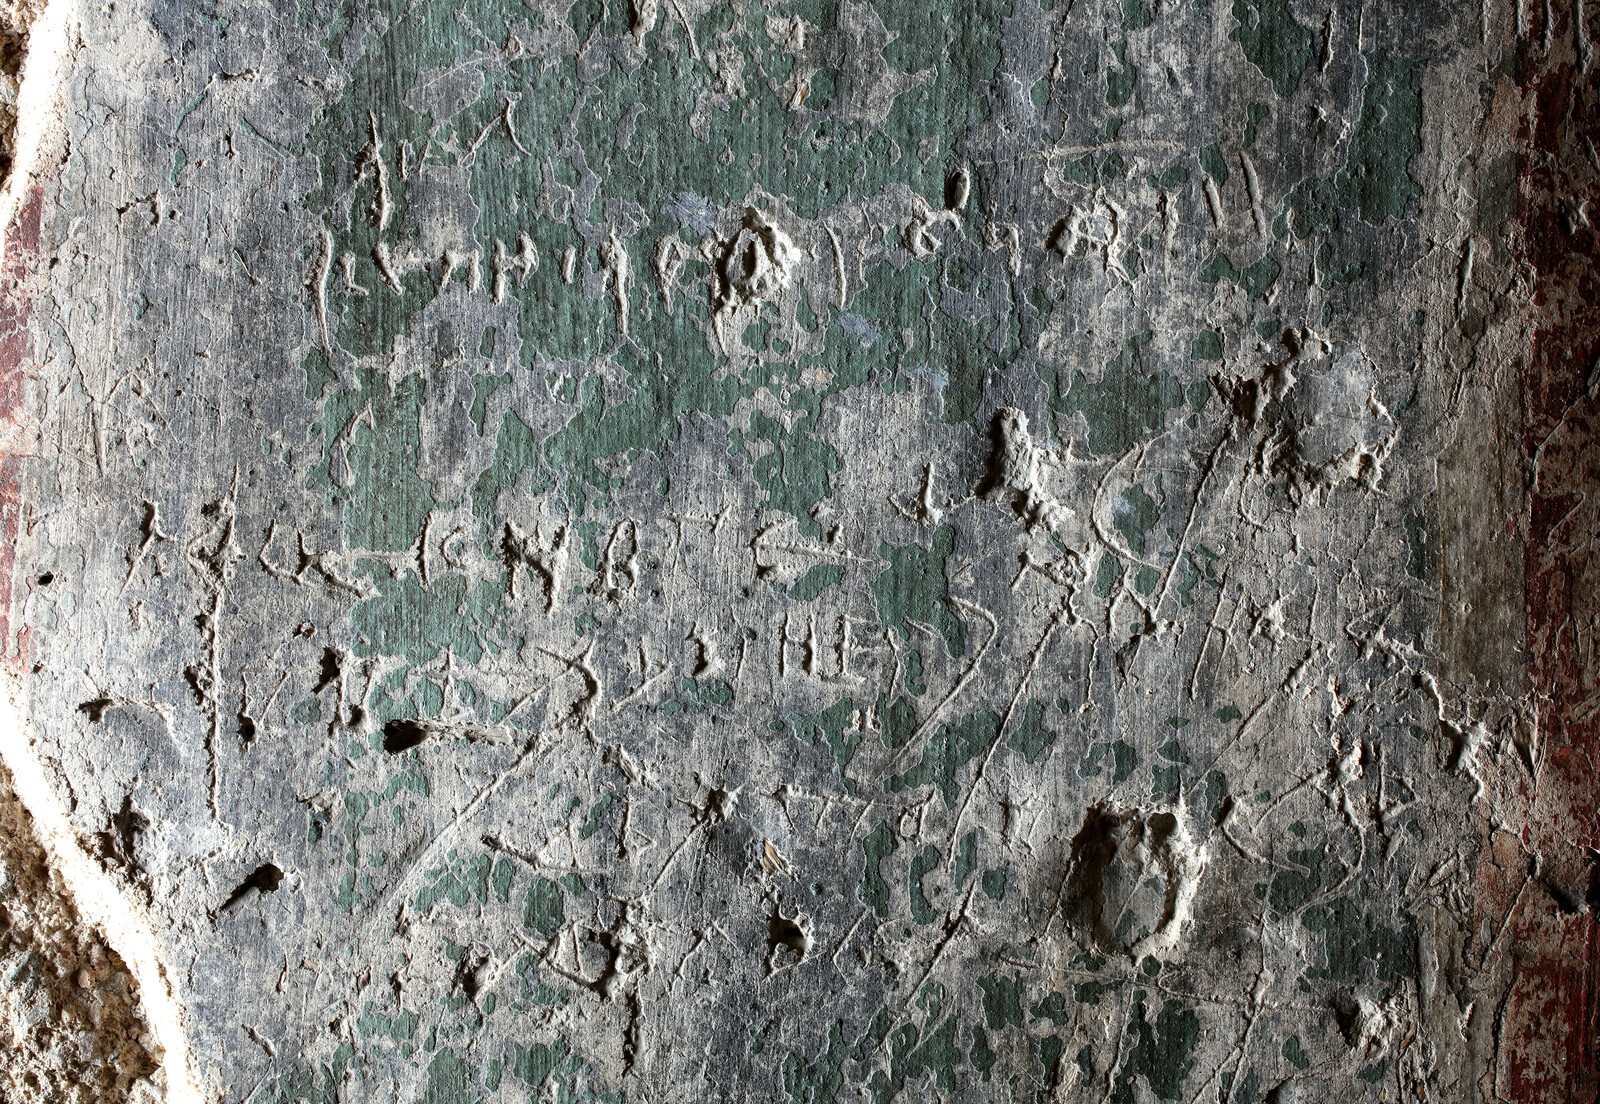 Engraved inscription besides of the entrance of diaconicon, detail